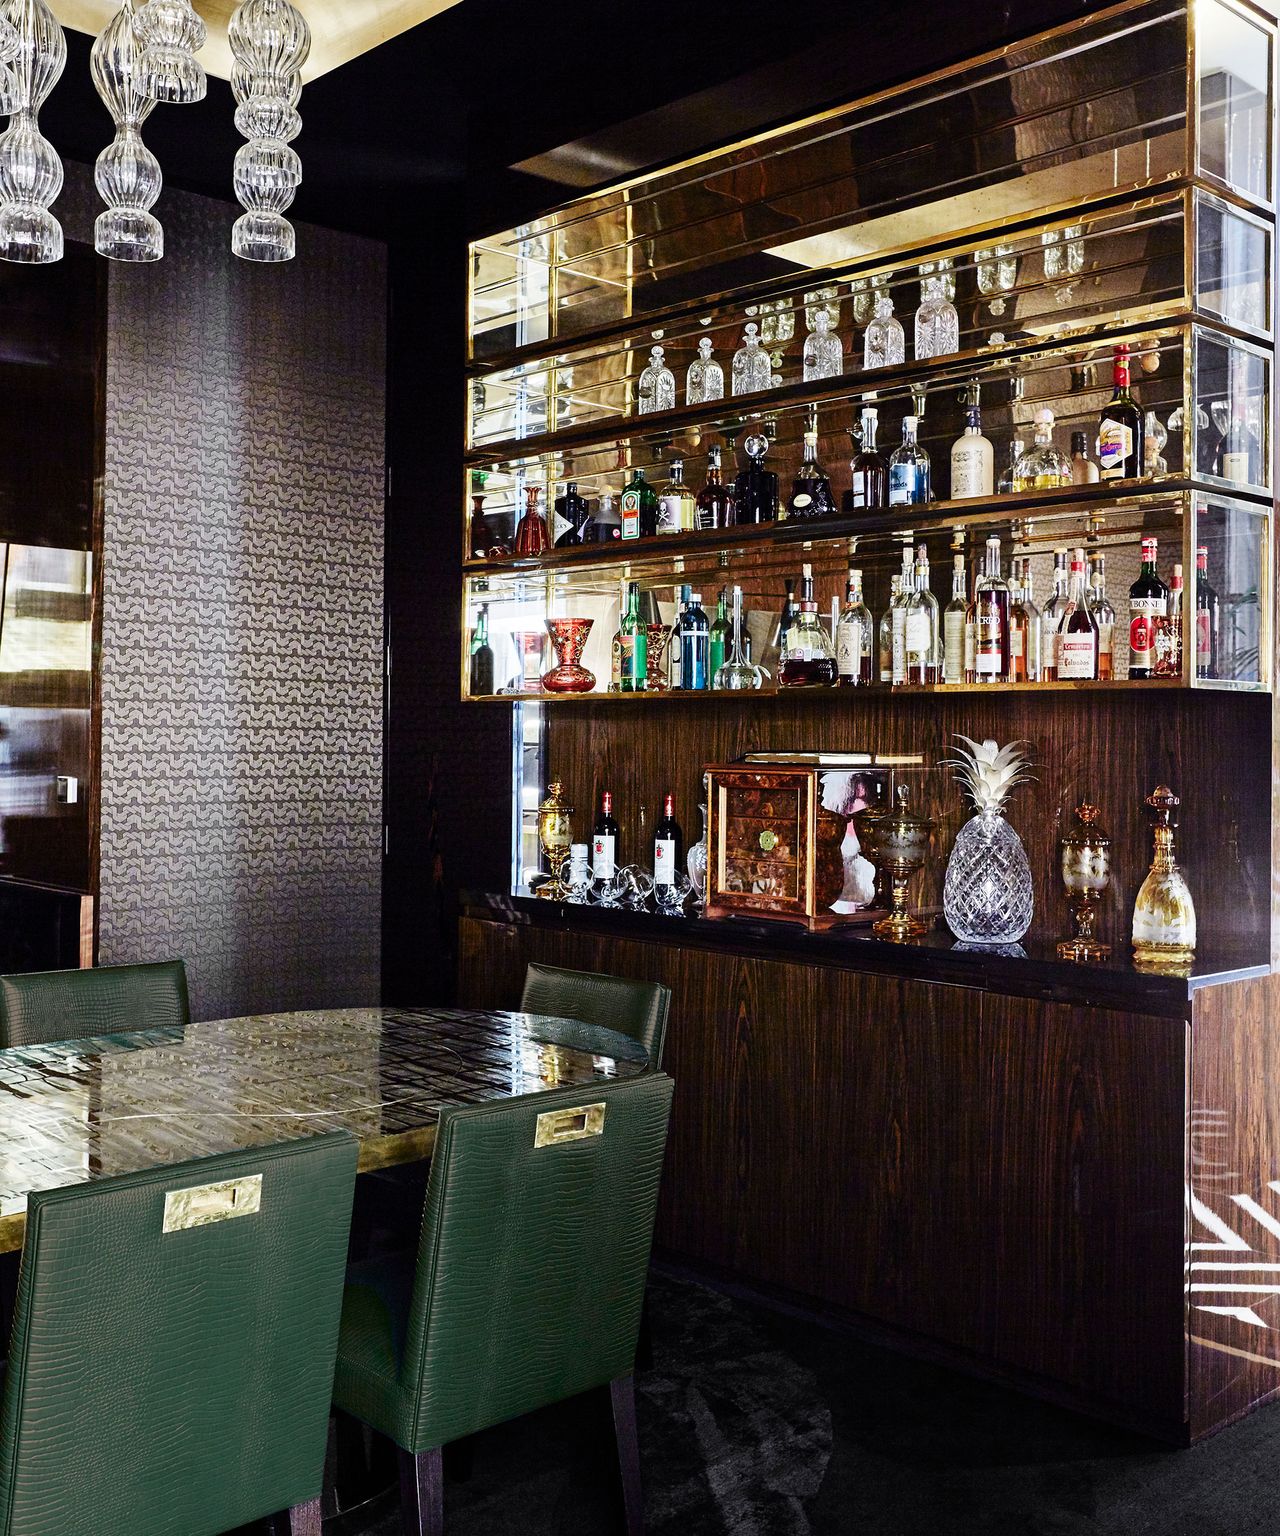 17 Home Bar Ideas The Best Home Bars For Entertainment